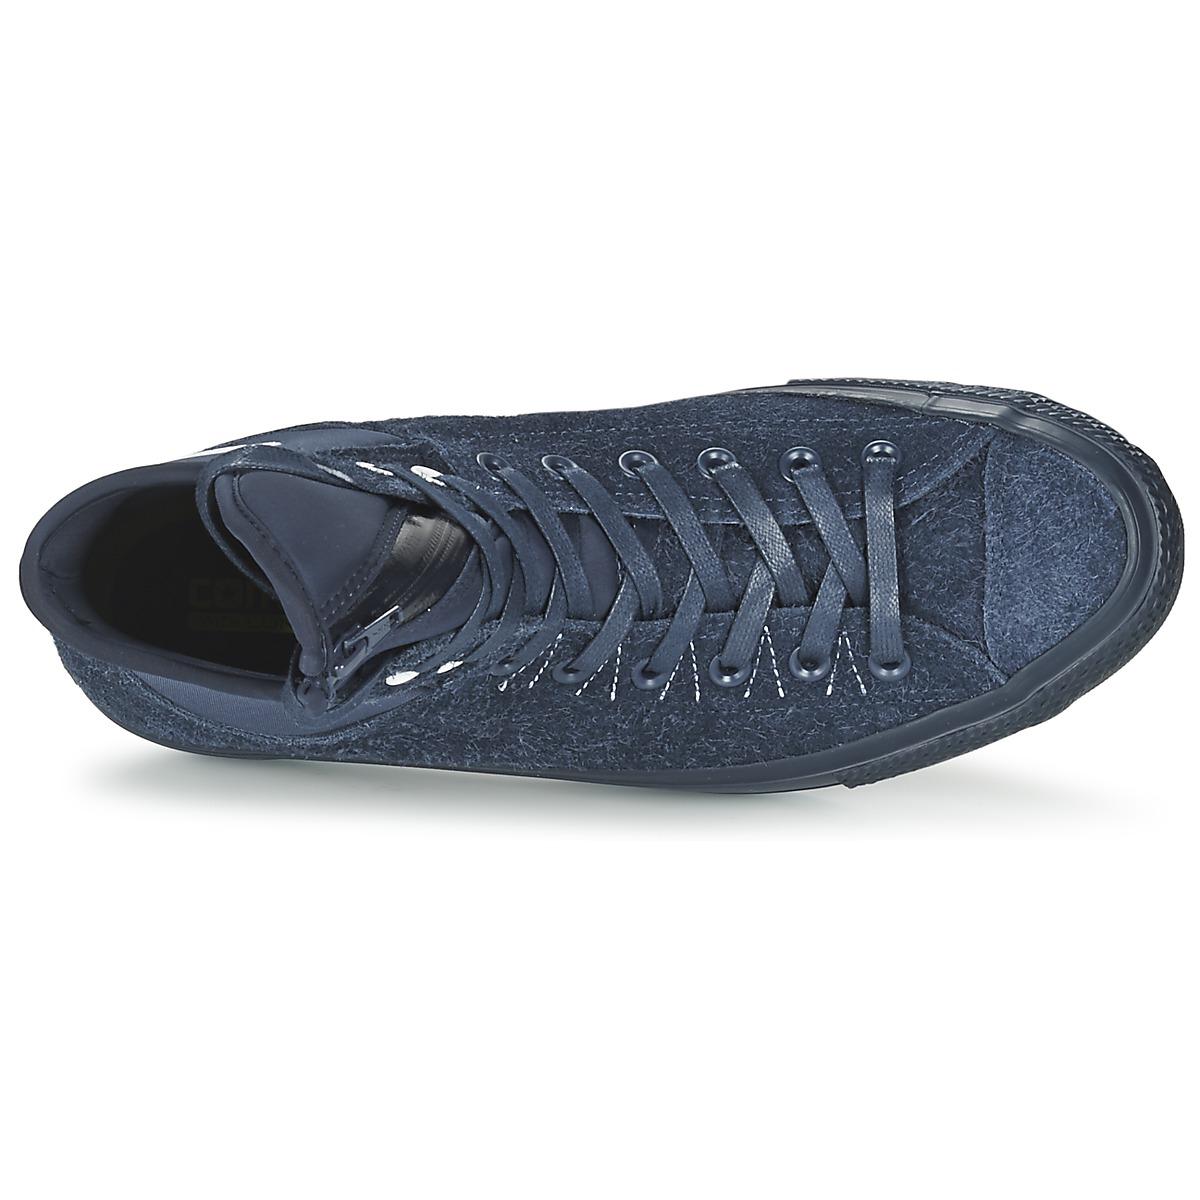 converse chuck taylor all star ma 1 hairy suede se high top